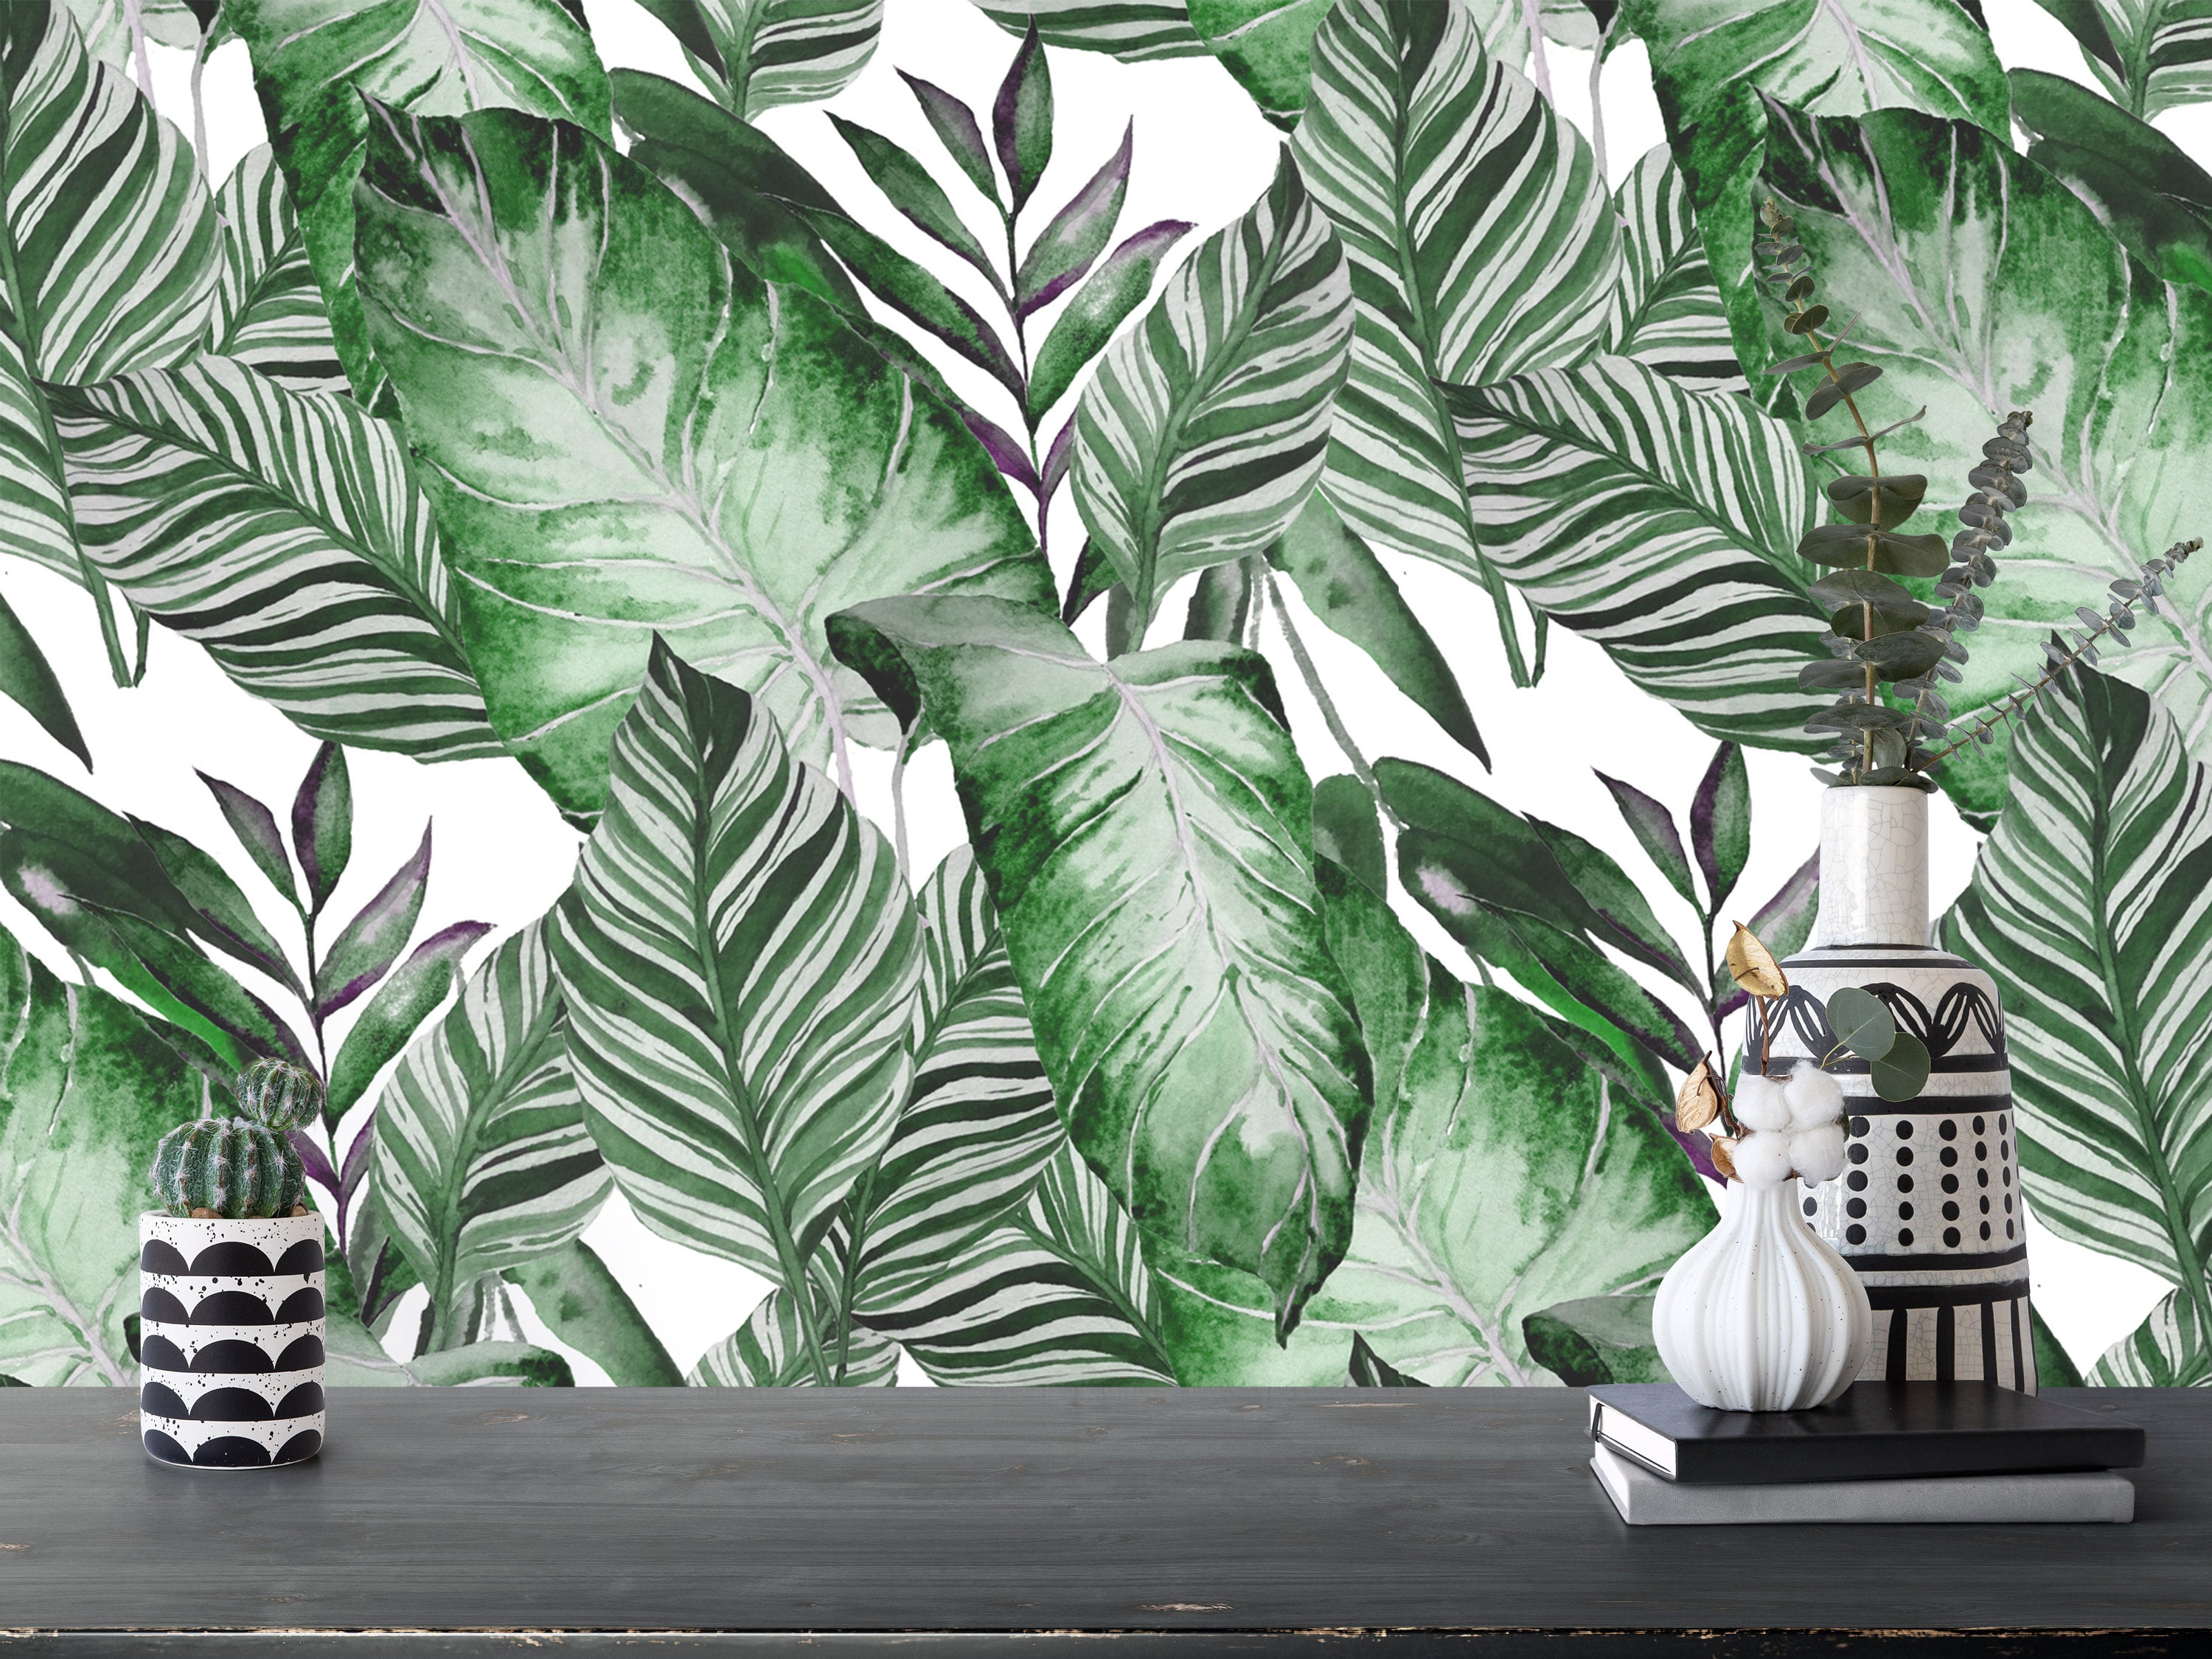 Monochrome Green Floral Palm Leaves Wallpaper Wall Covering